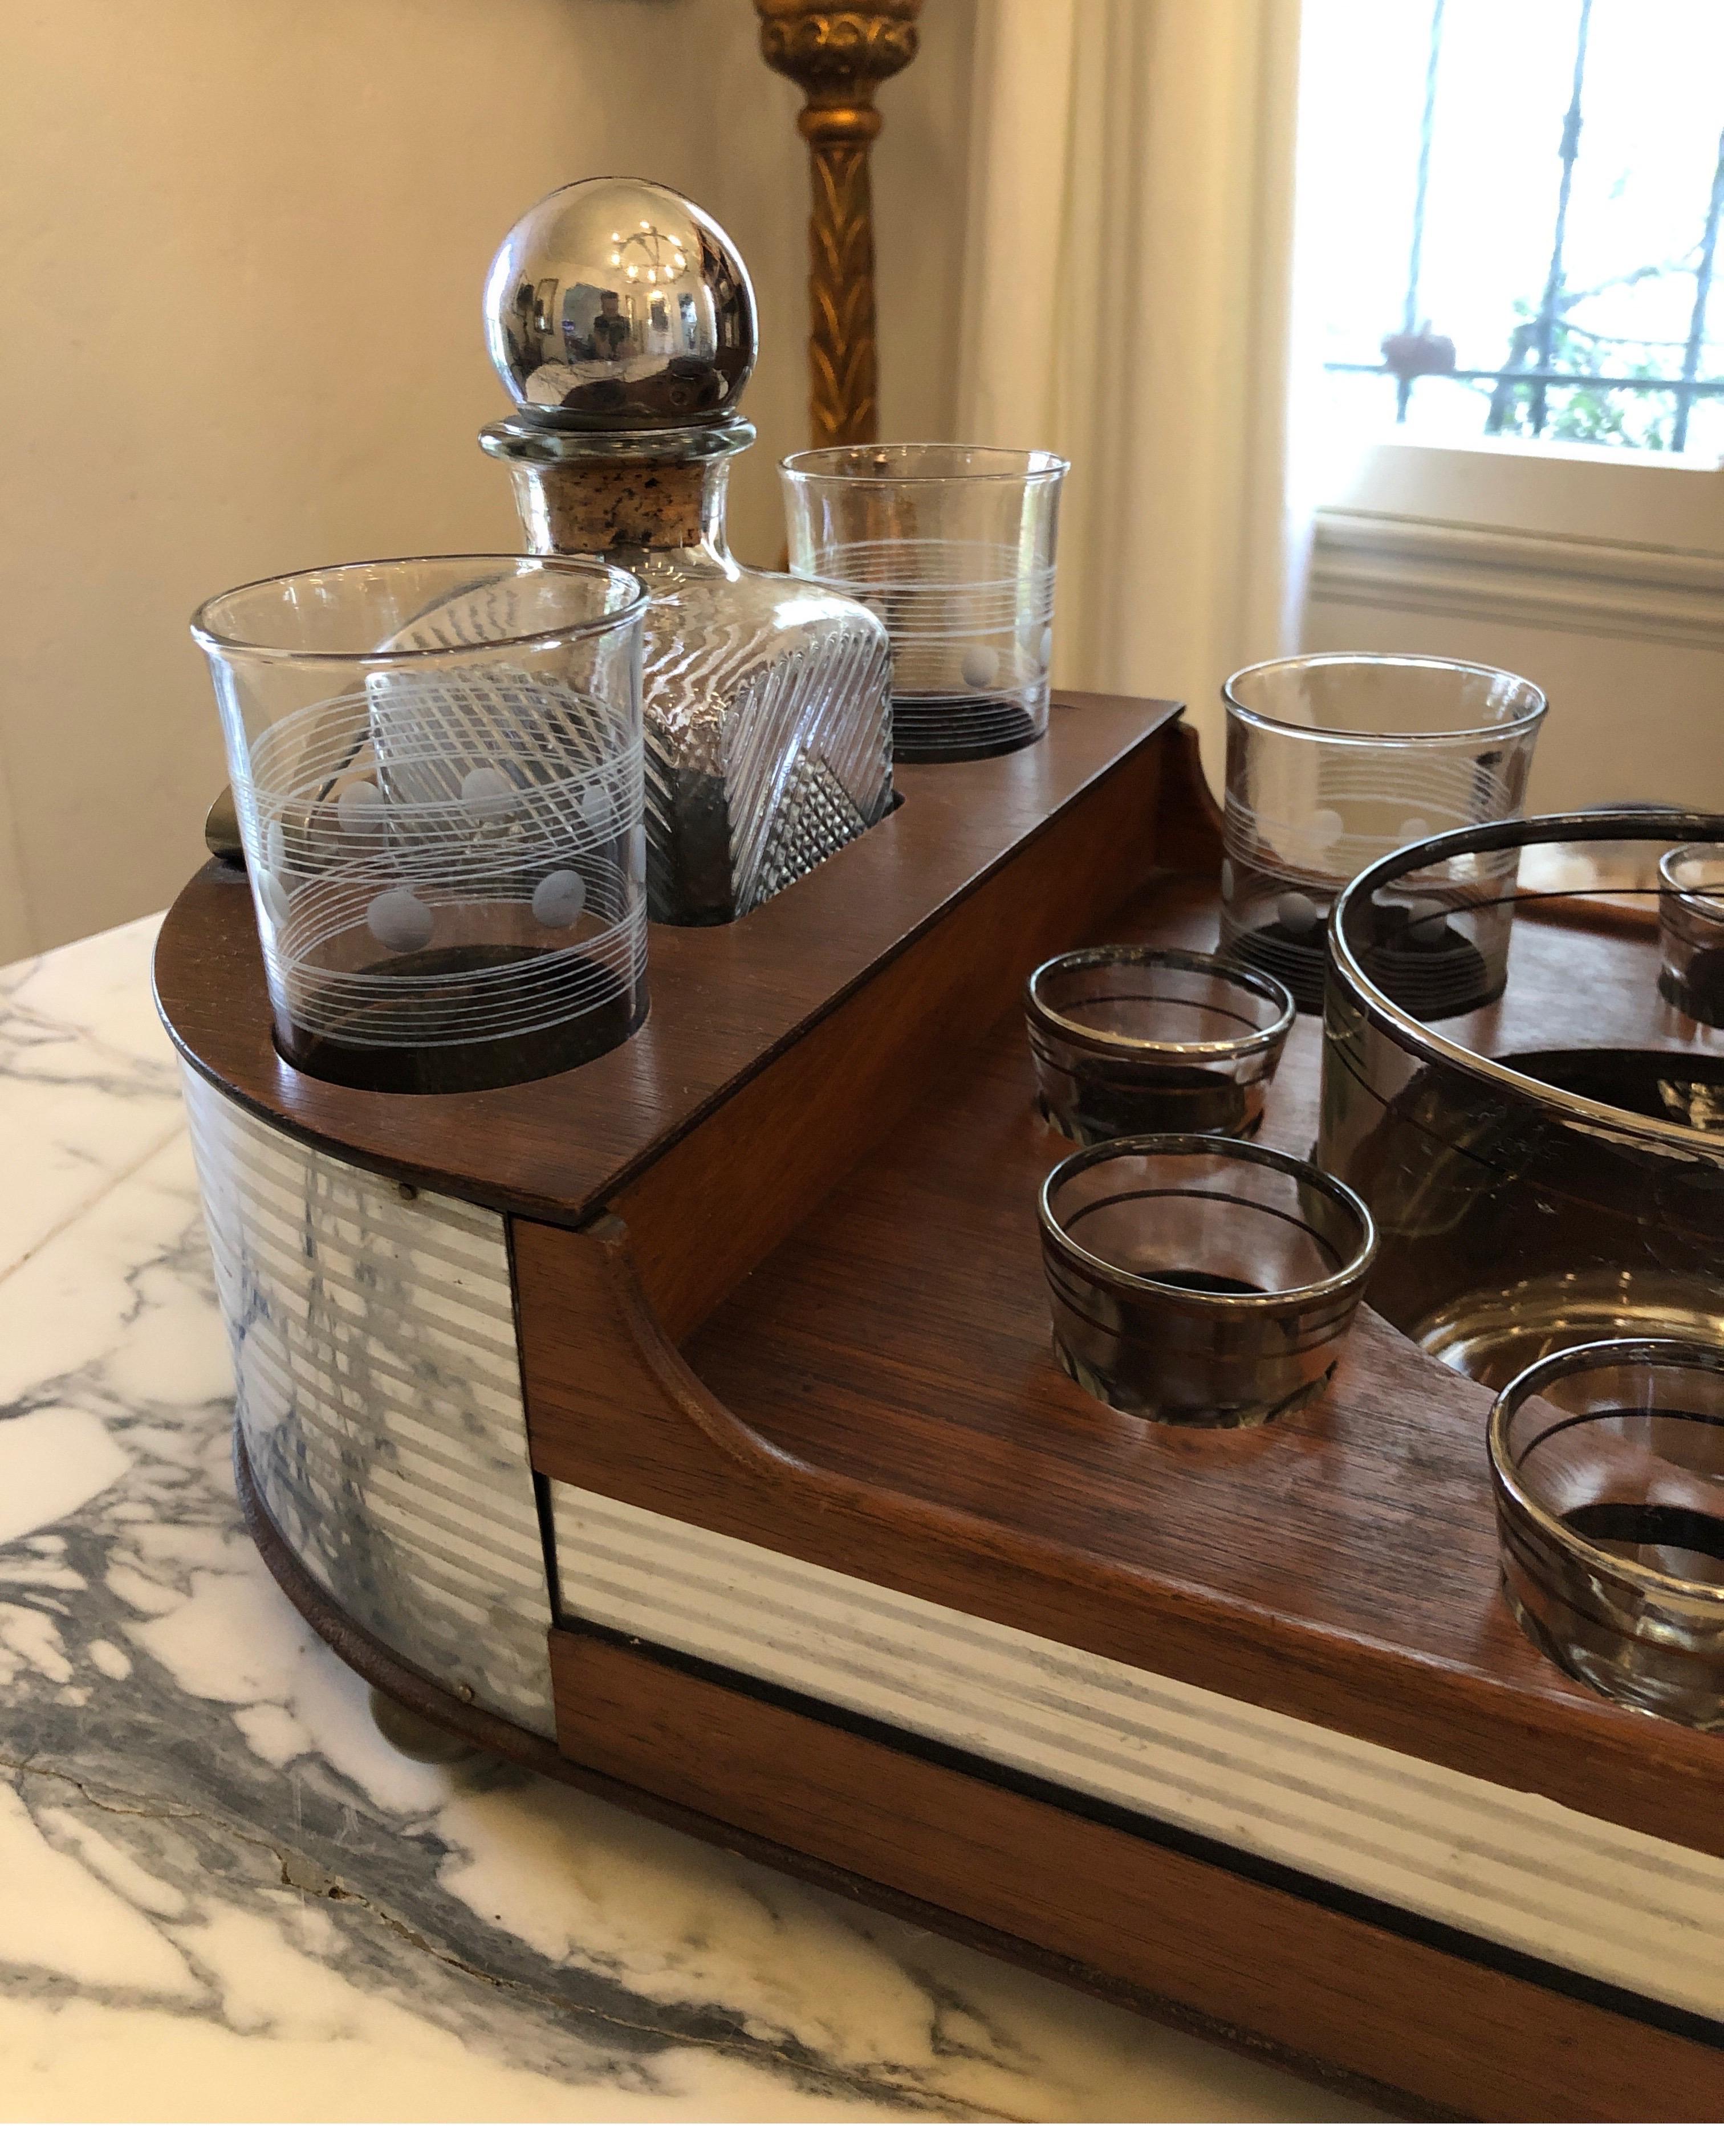 American, 1st half 20th century. Art Deco style chromed metal and wood portable bar or drinks set, the fitted tray having an oblong shape with rounded handles to each end and Inserts for bourbon decanter, scotch decanter, six shot glasses, six